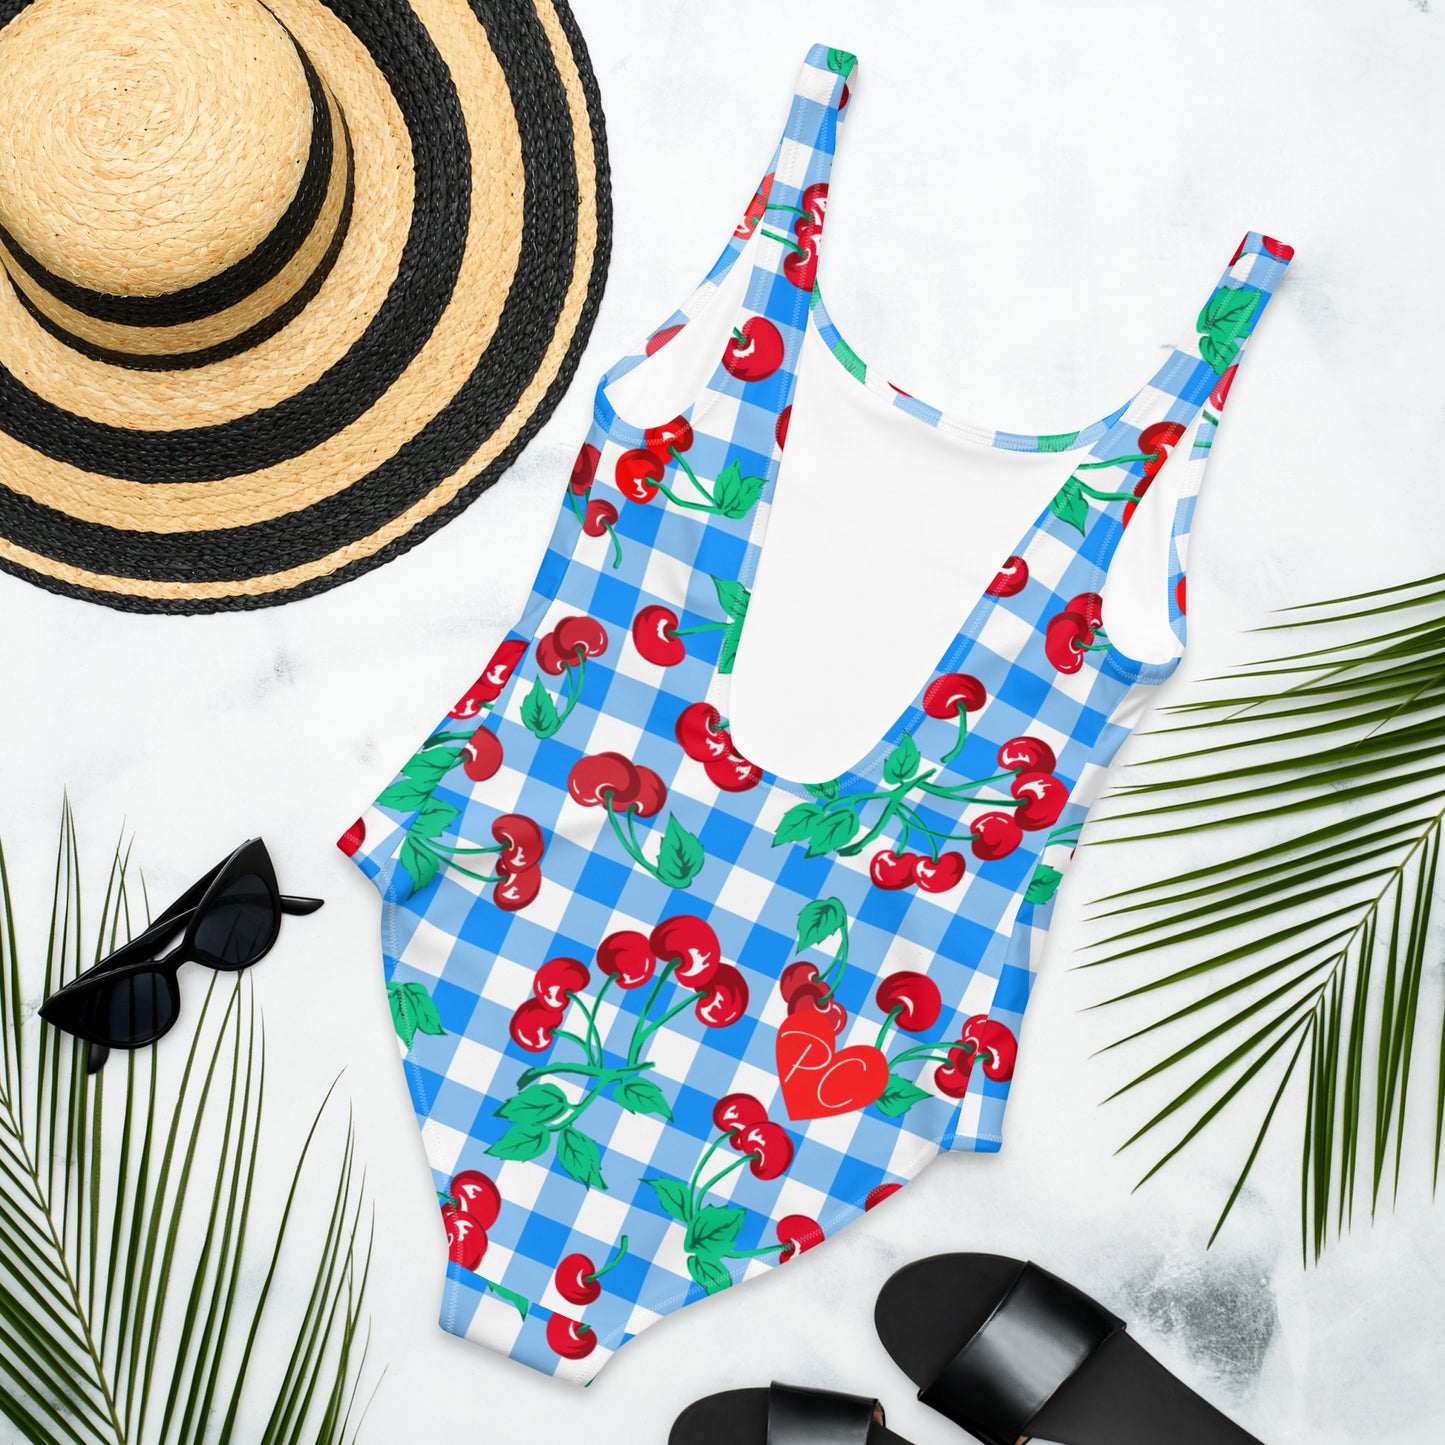 Rory Blue Gingham Cherry Girl One-Piece Swimsuit | Pinup Couture Swim